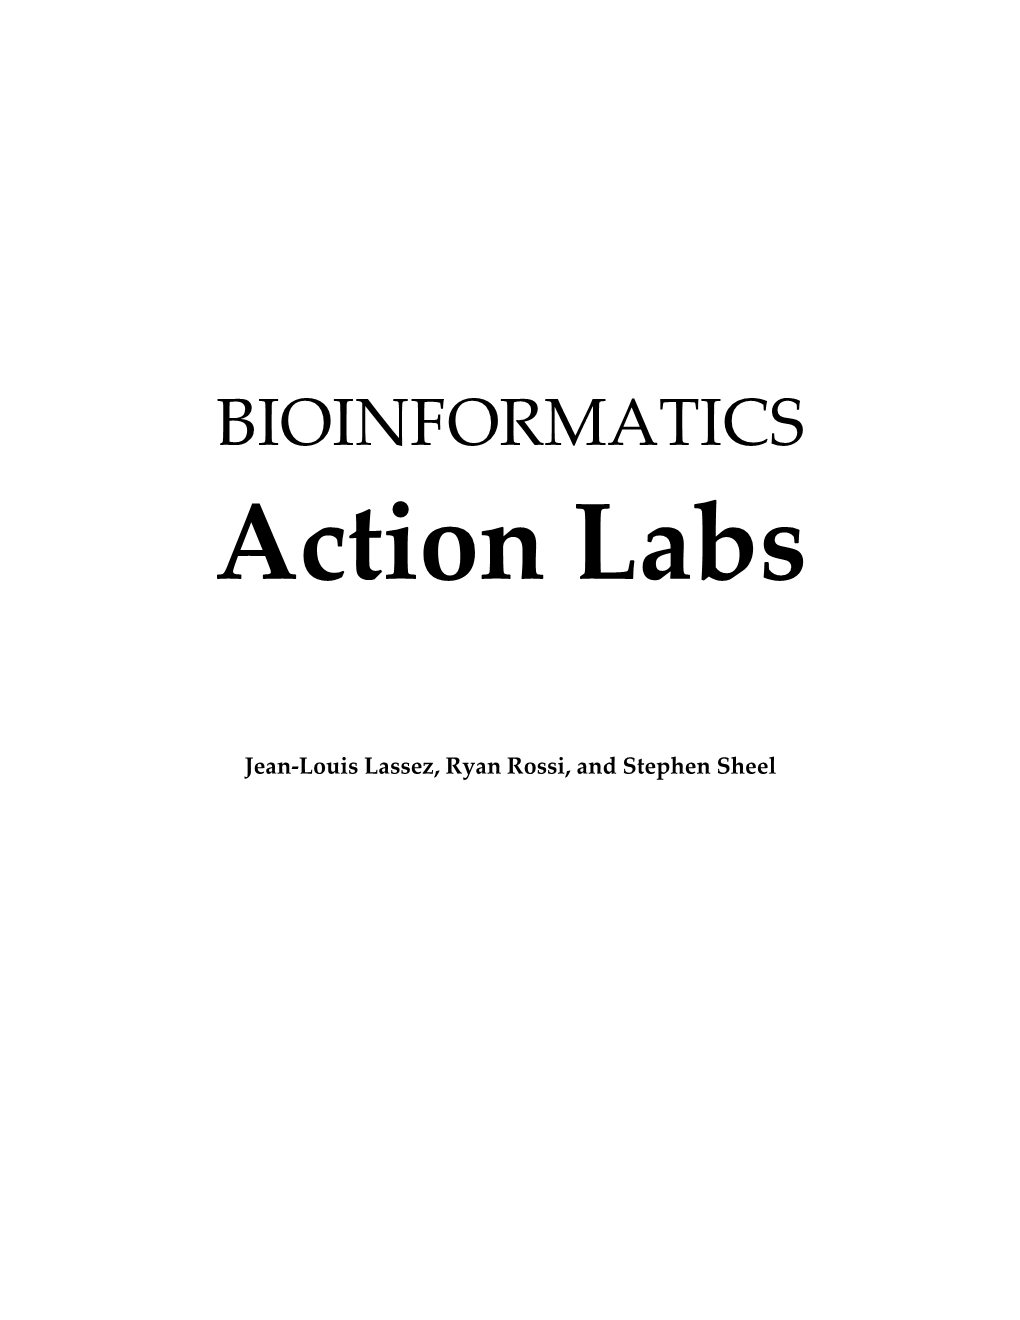 Introduction to Bioinformatics Using Action Labs